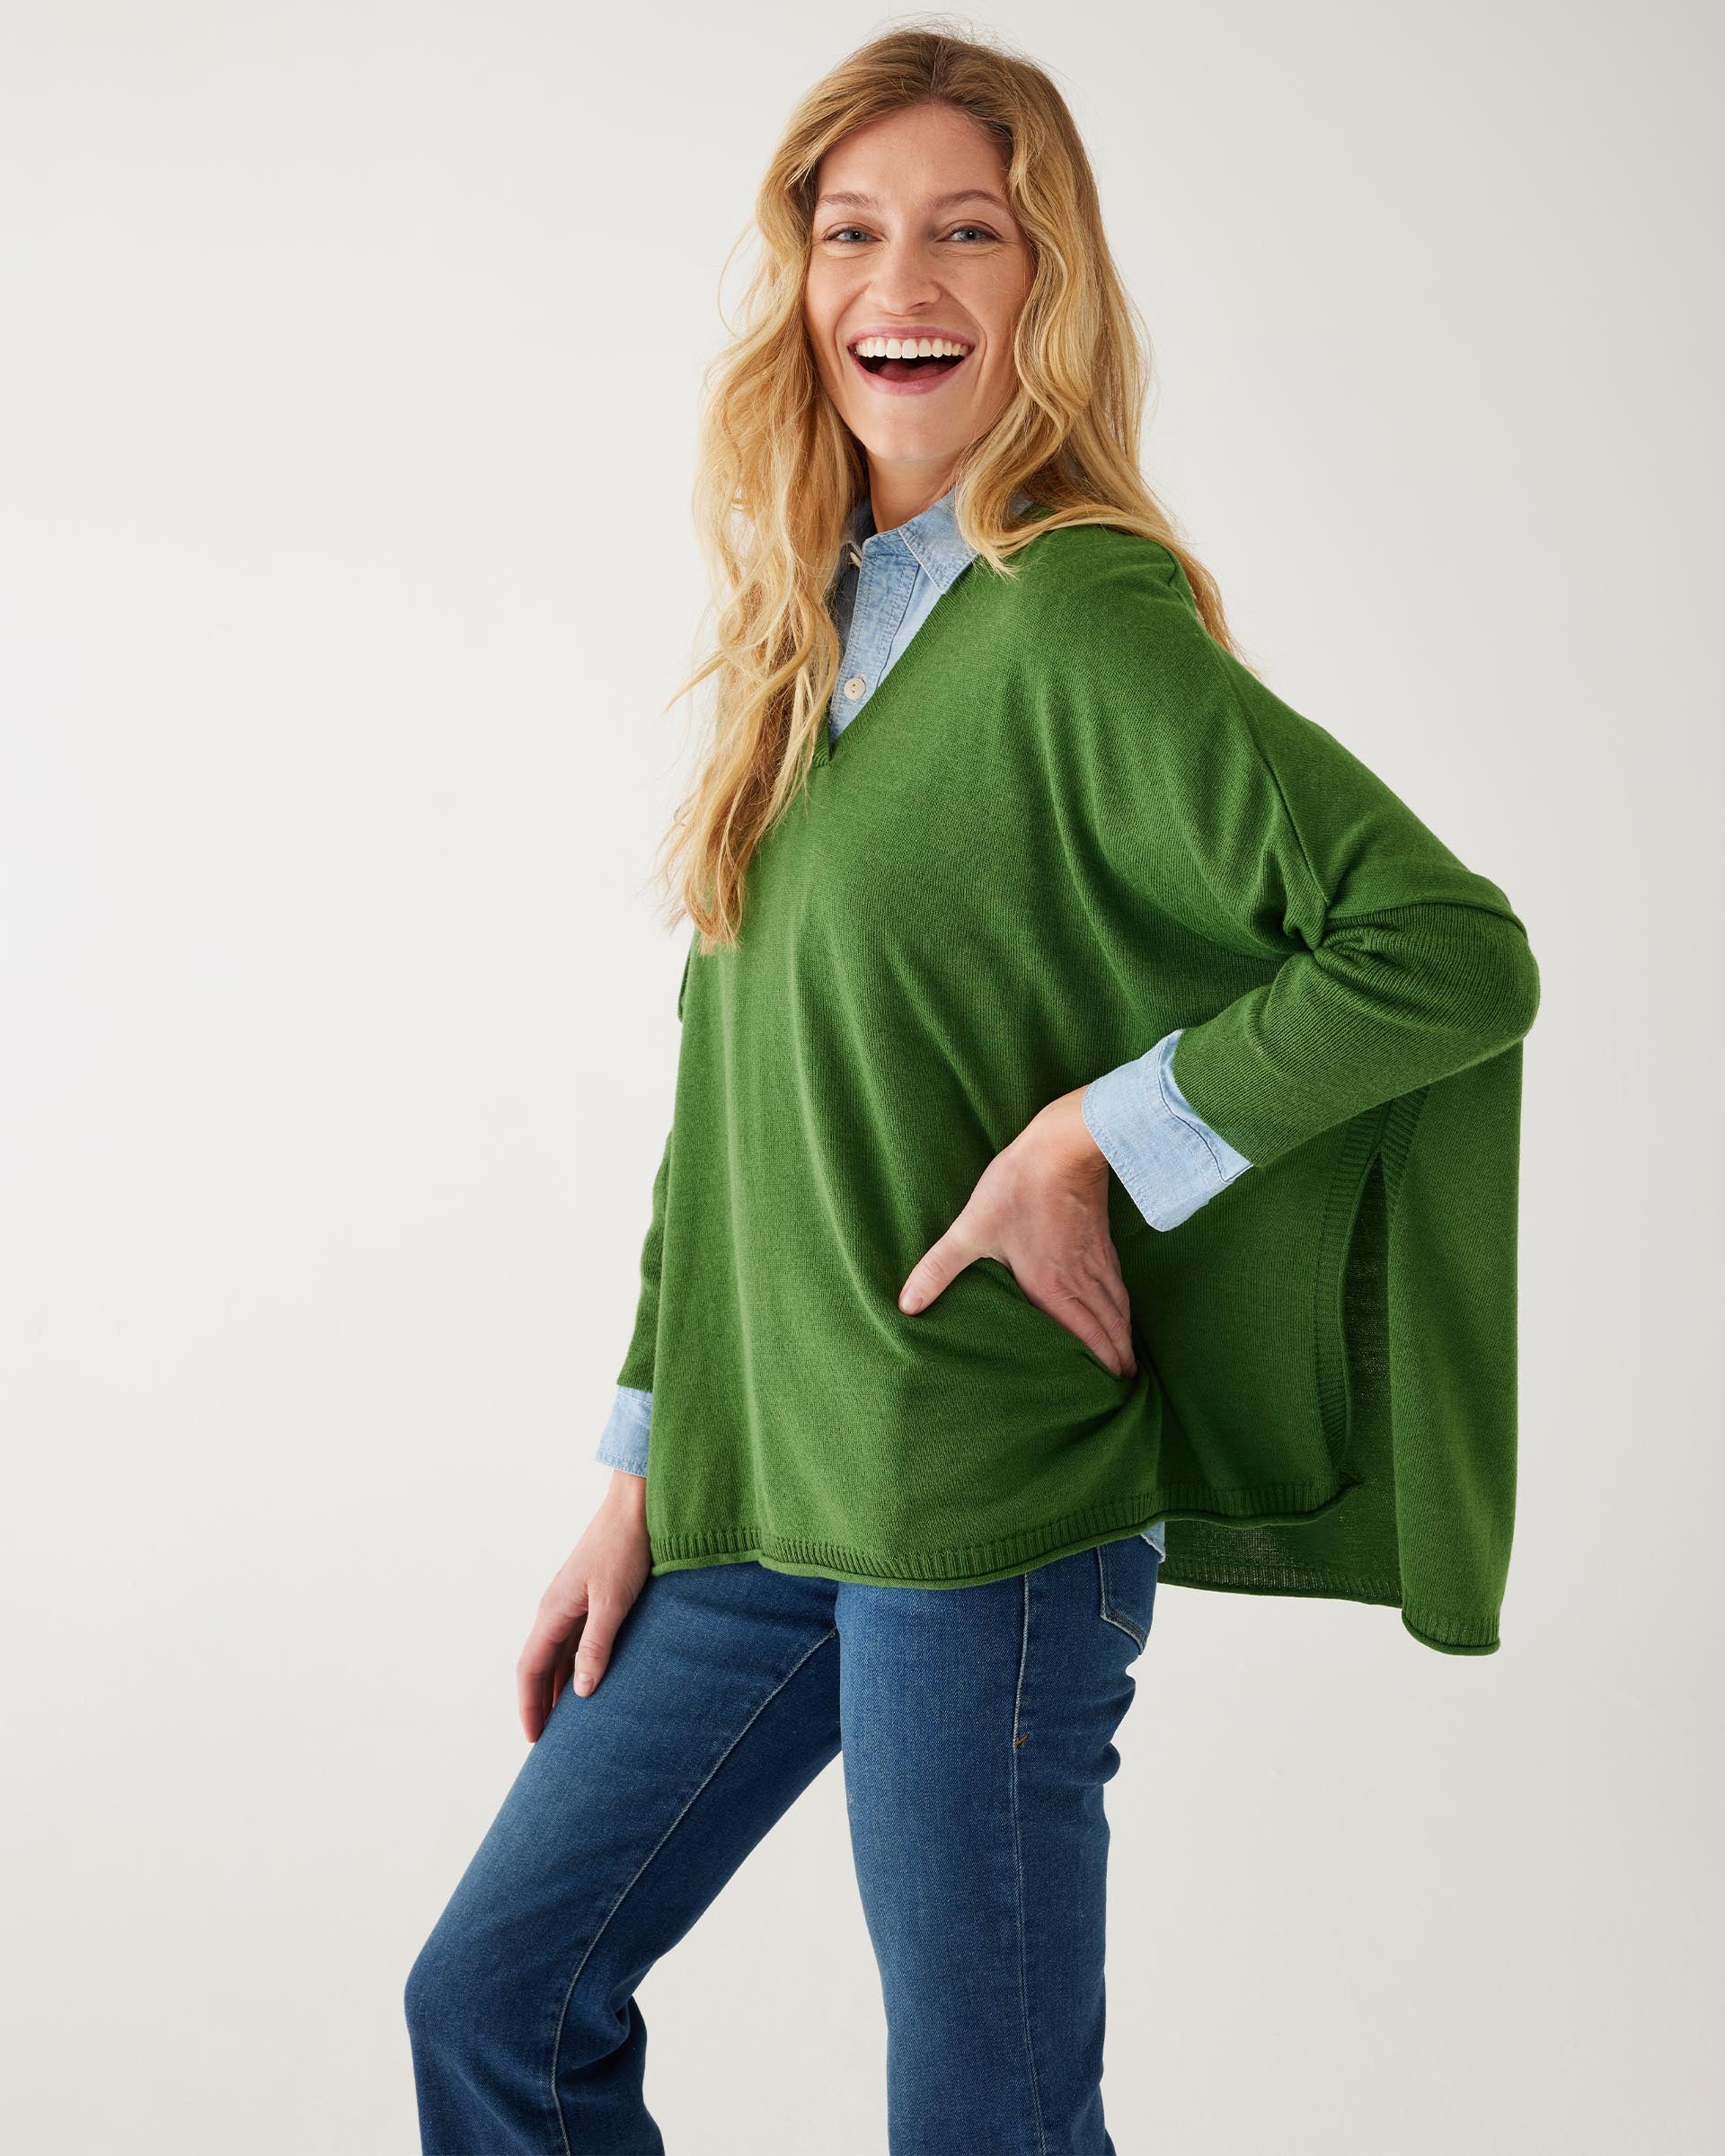 female wearing a green v neck sweater over a blue button shirt on white background